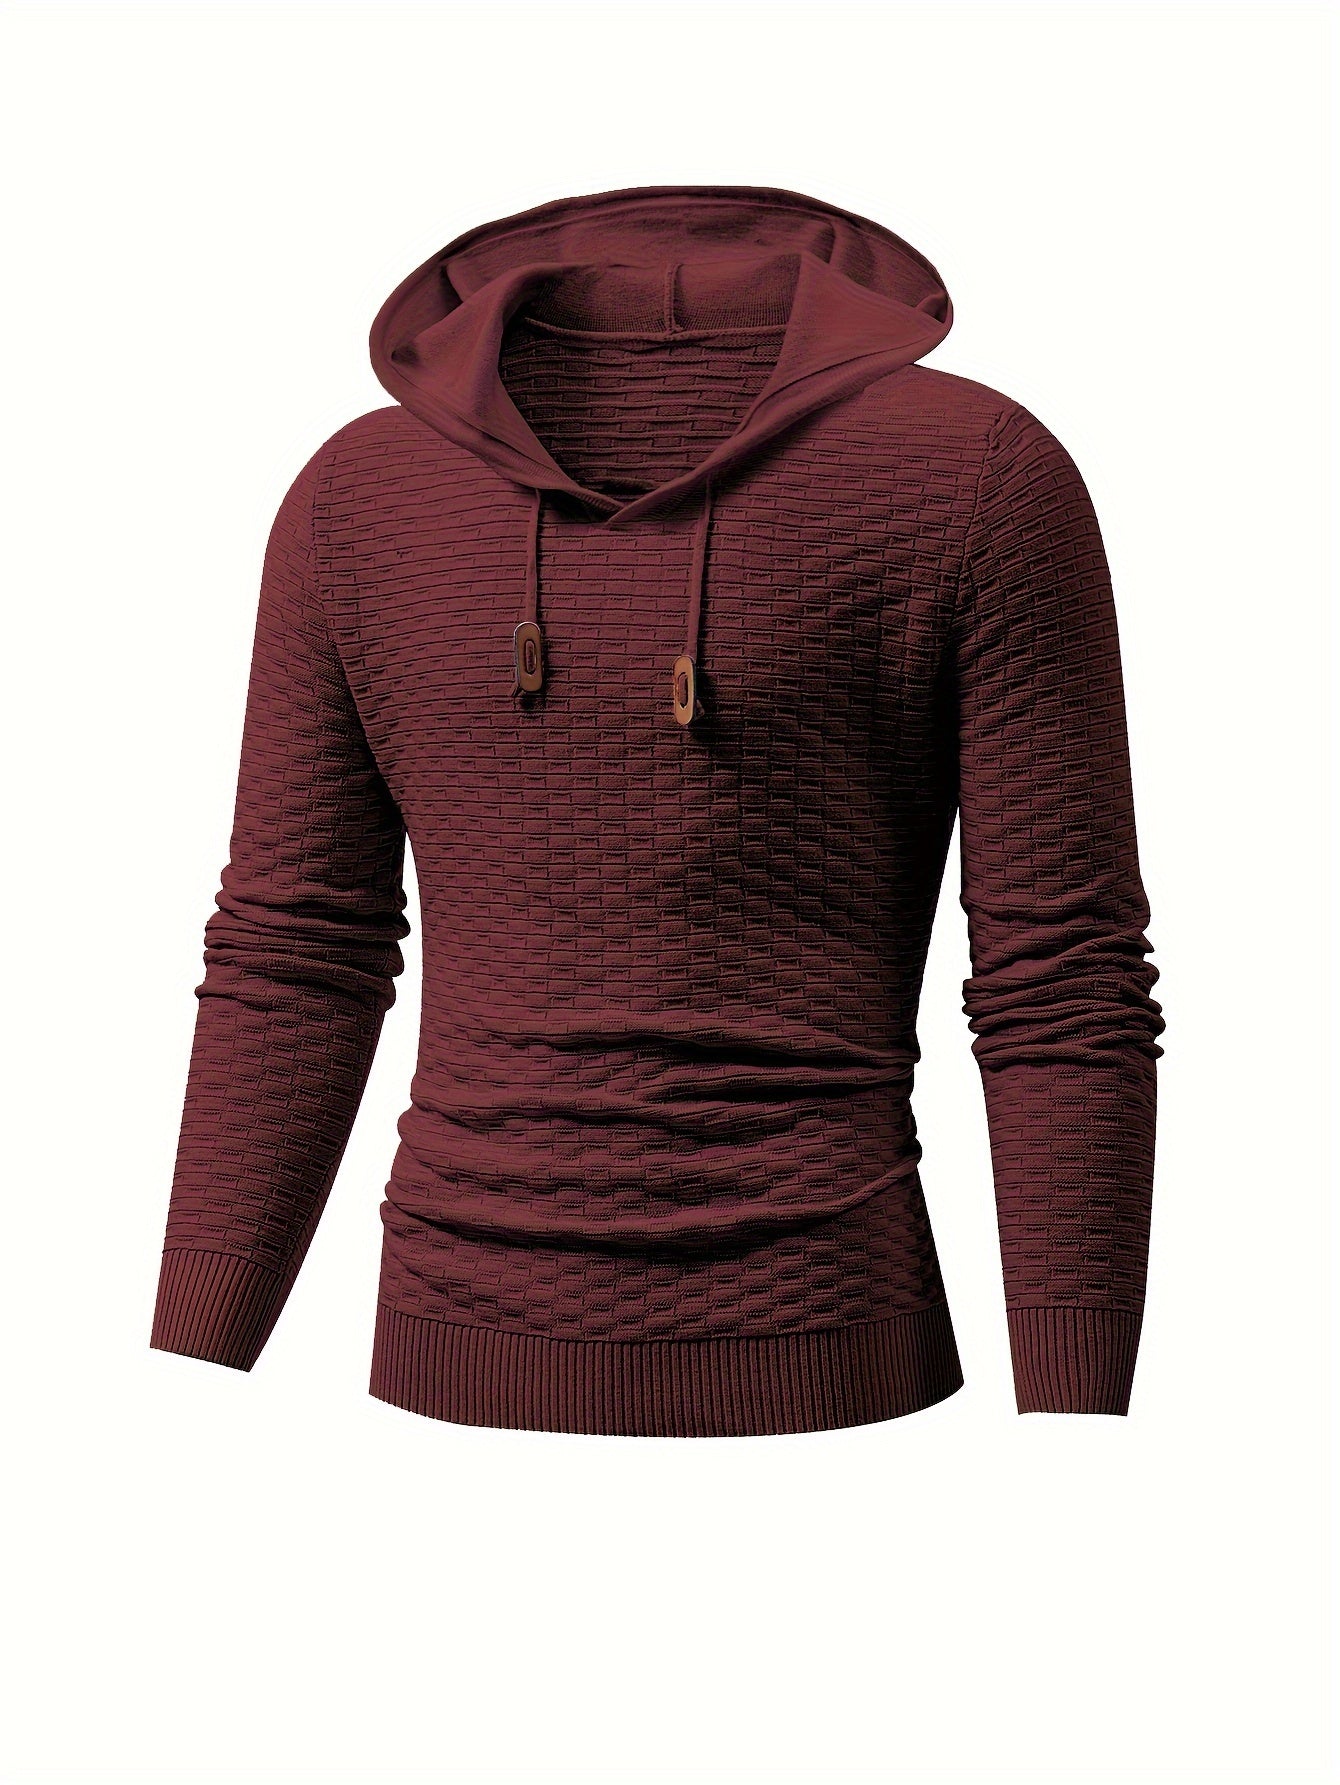 Foruwish - Men's Casual Drawstring Long Sleeves Hooded Pullover Sweaters